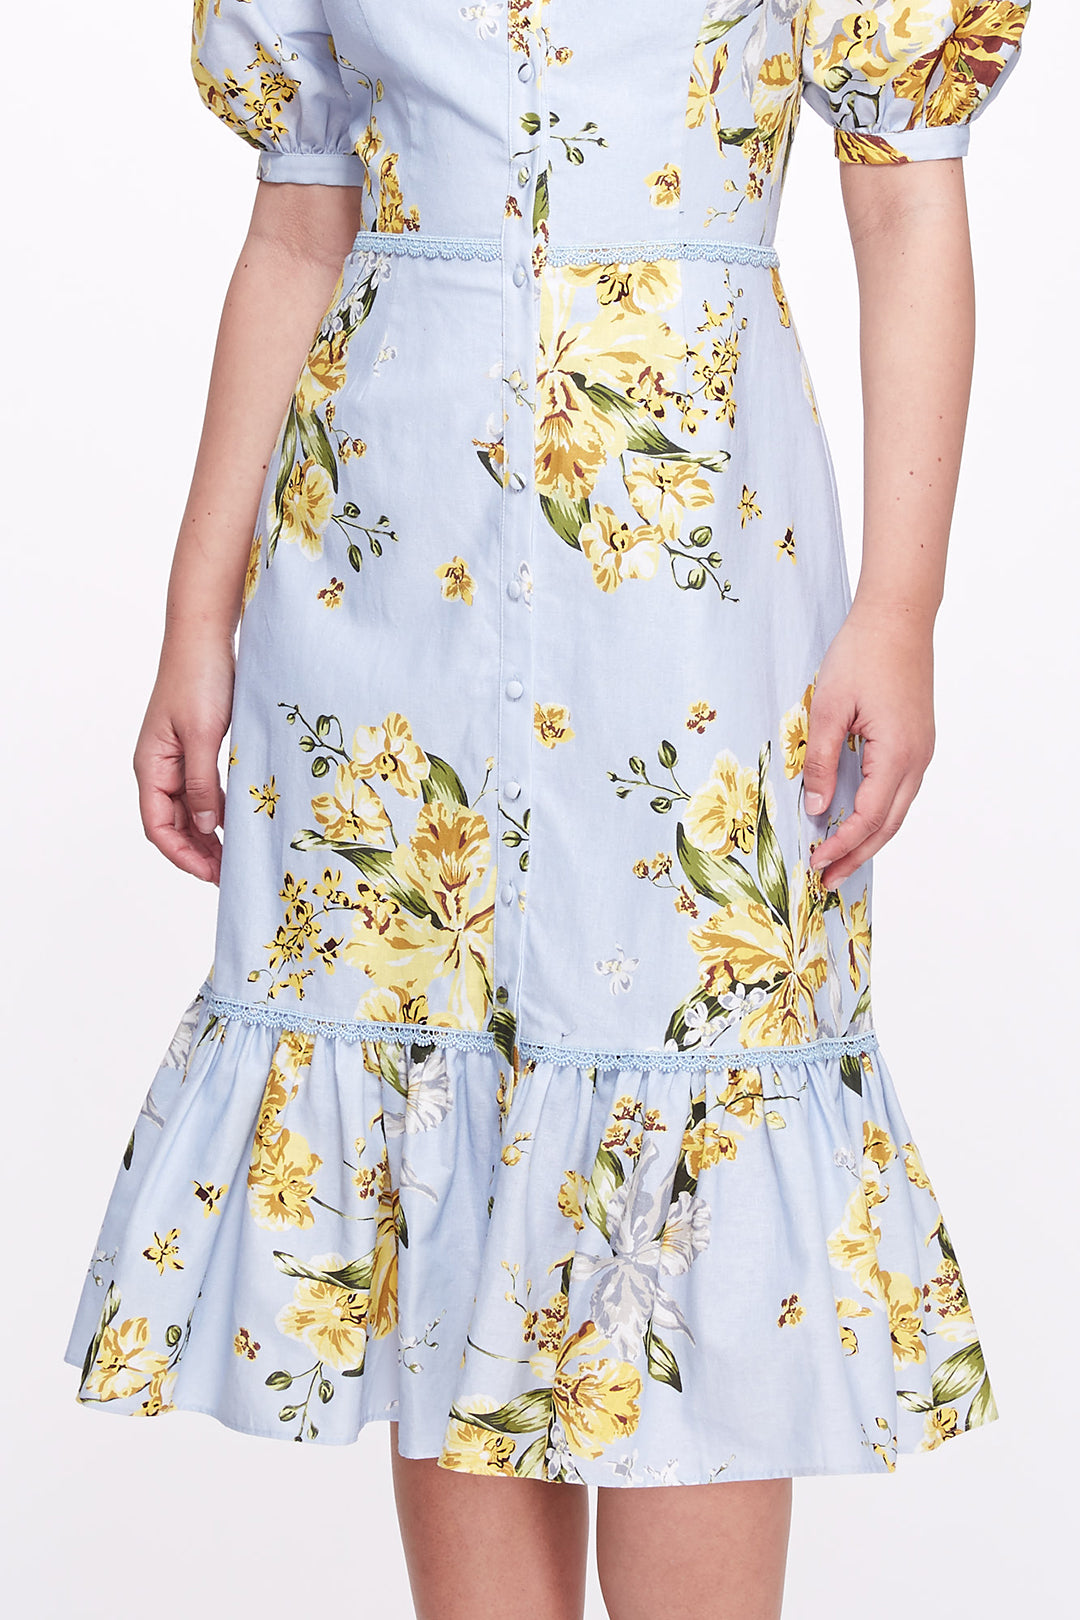 Sweetheart Neckline Floral Print Fitted Midi Dress Marchesa